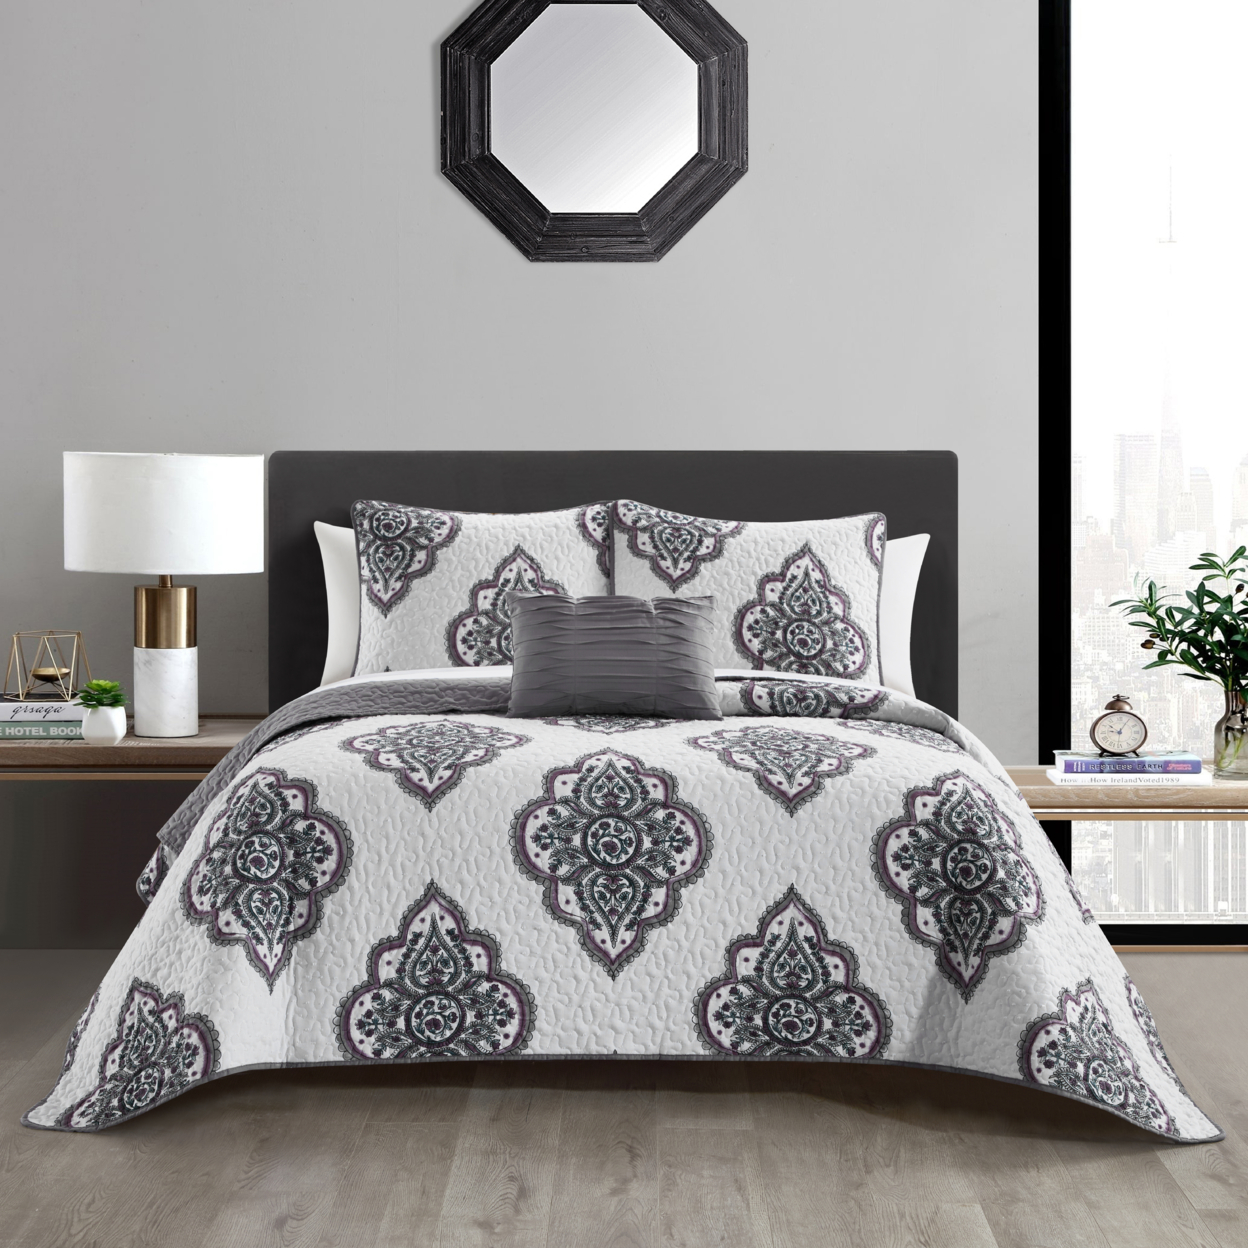 Ennett 4 Or 8 Piece Cotton Jacquard Quilt Set Medallion Embroidered Bedding - Grey With Sheet Set, Queen (10 Piece)